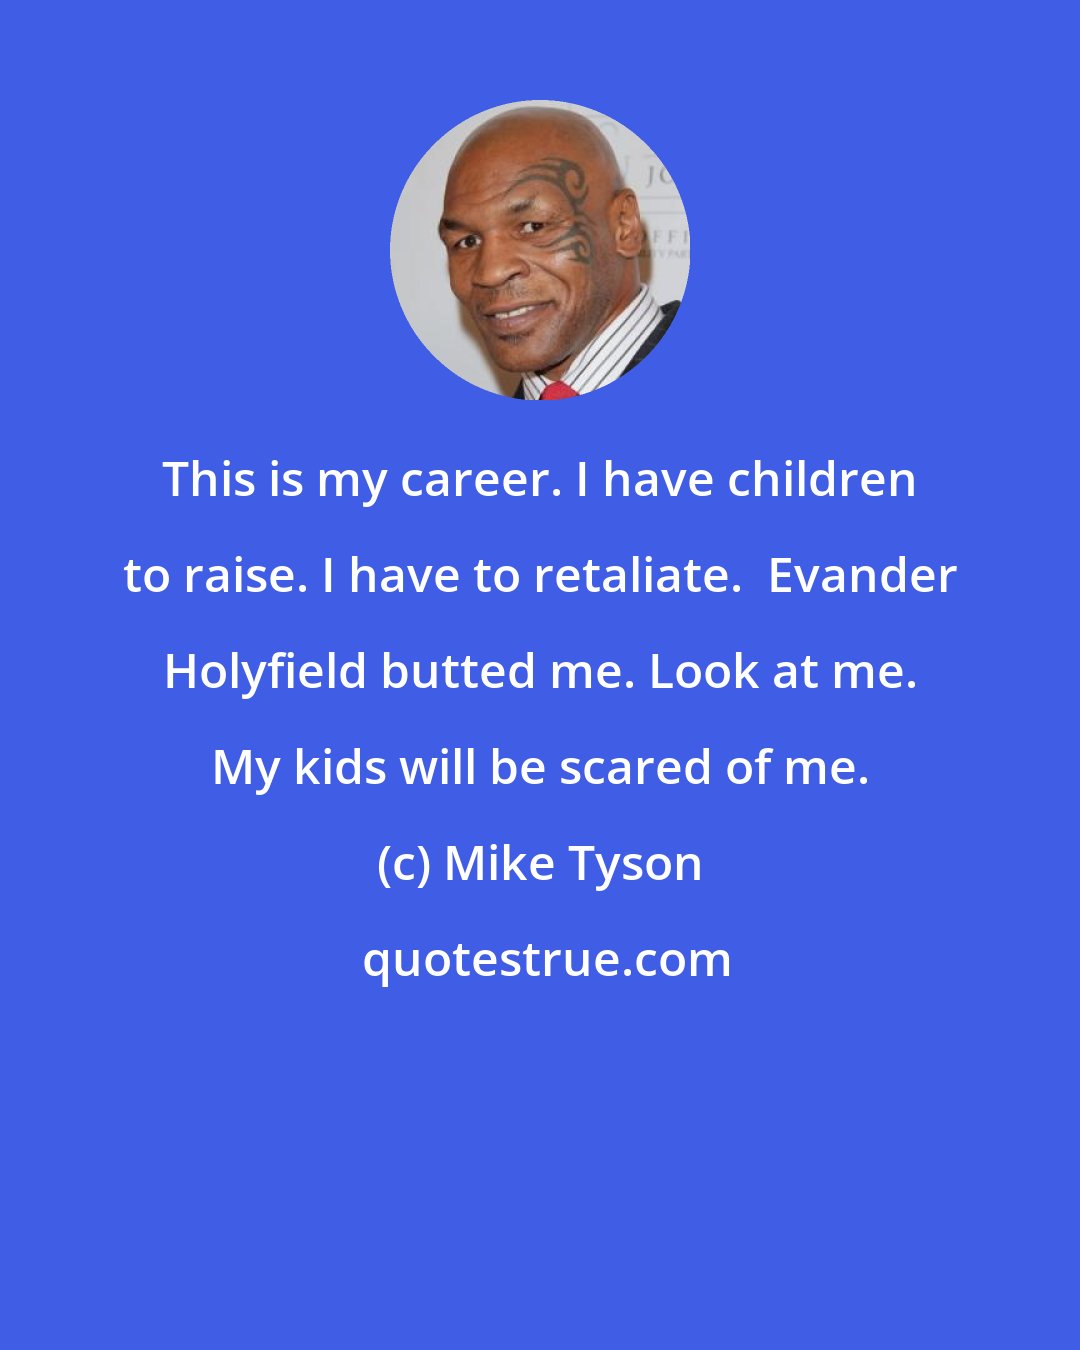 Mike Tyson: This is my career. I have children to raise. I have to retaliate.  Evander Holyfield butted me. Look at me. My kids will be scared of me.